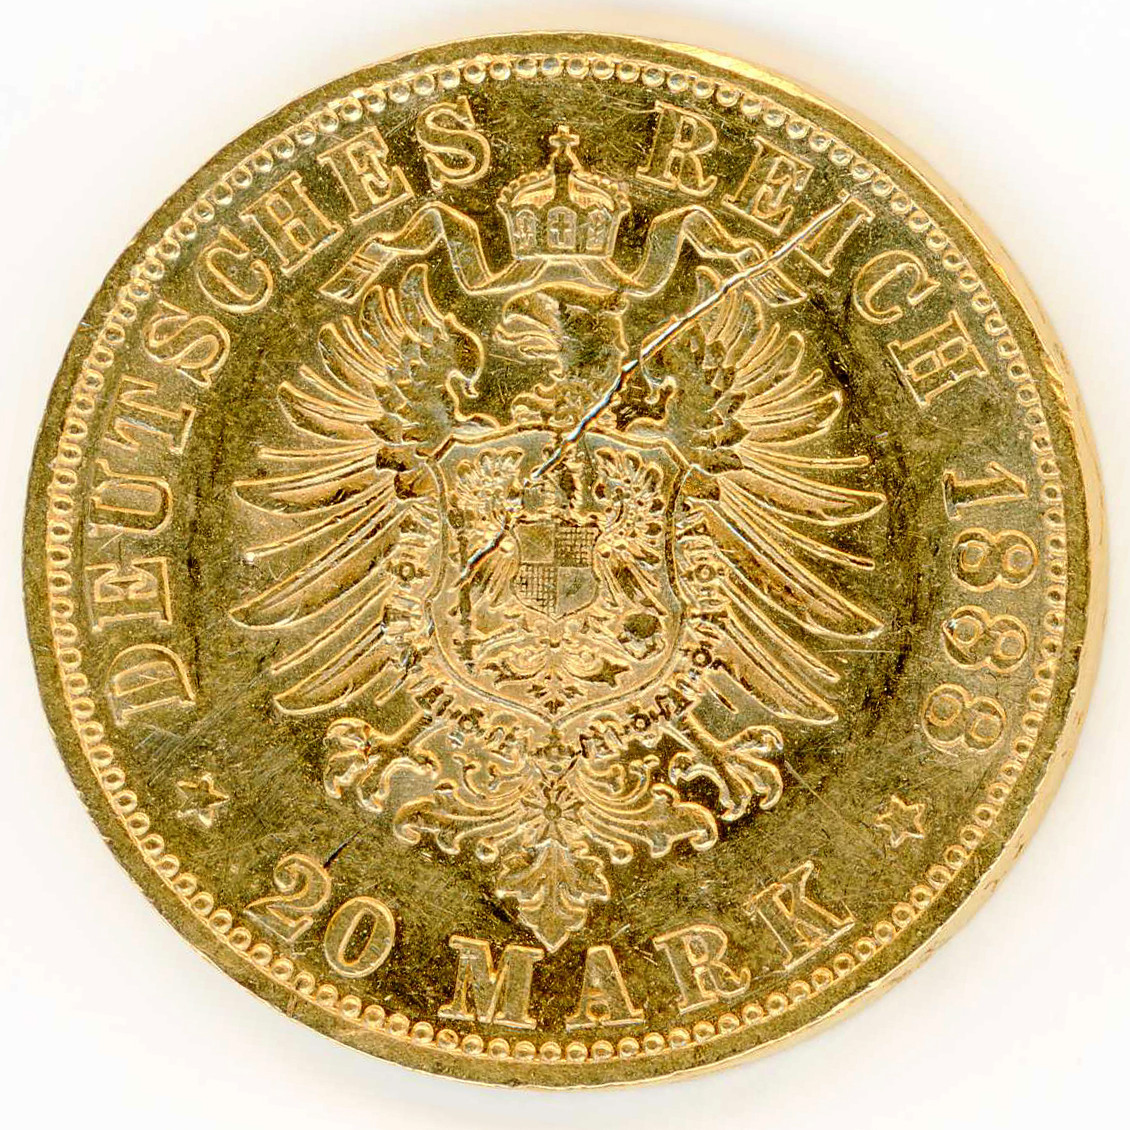 Allemagne - 20 Mark - 1888 A revers